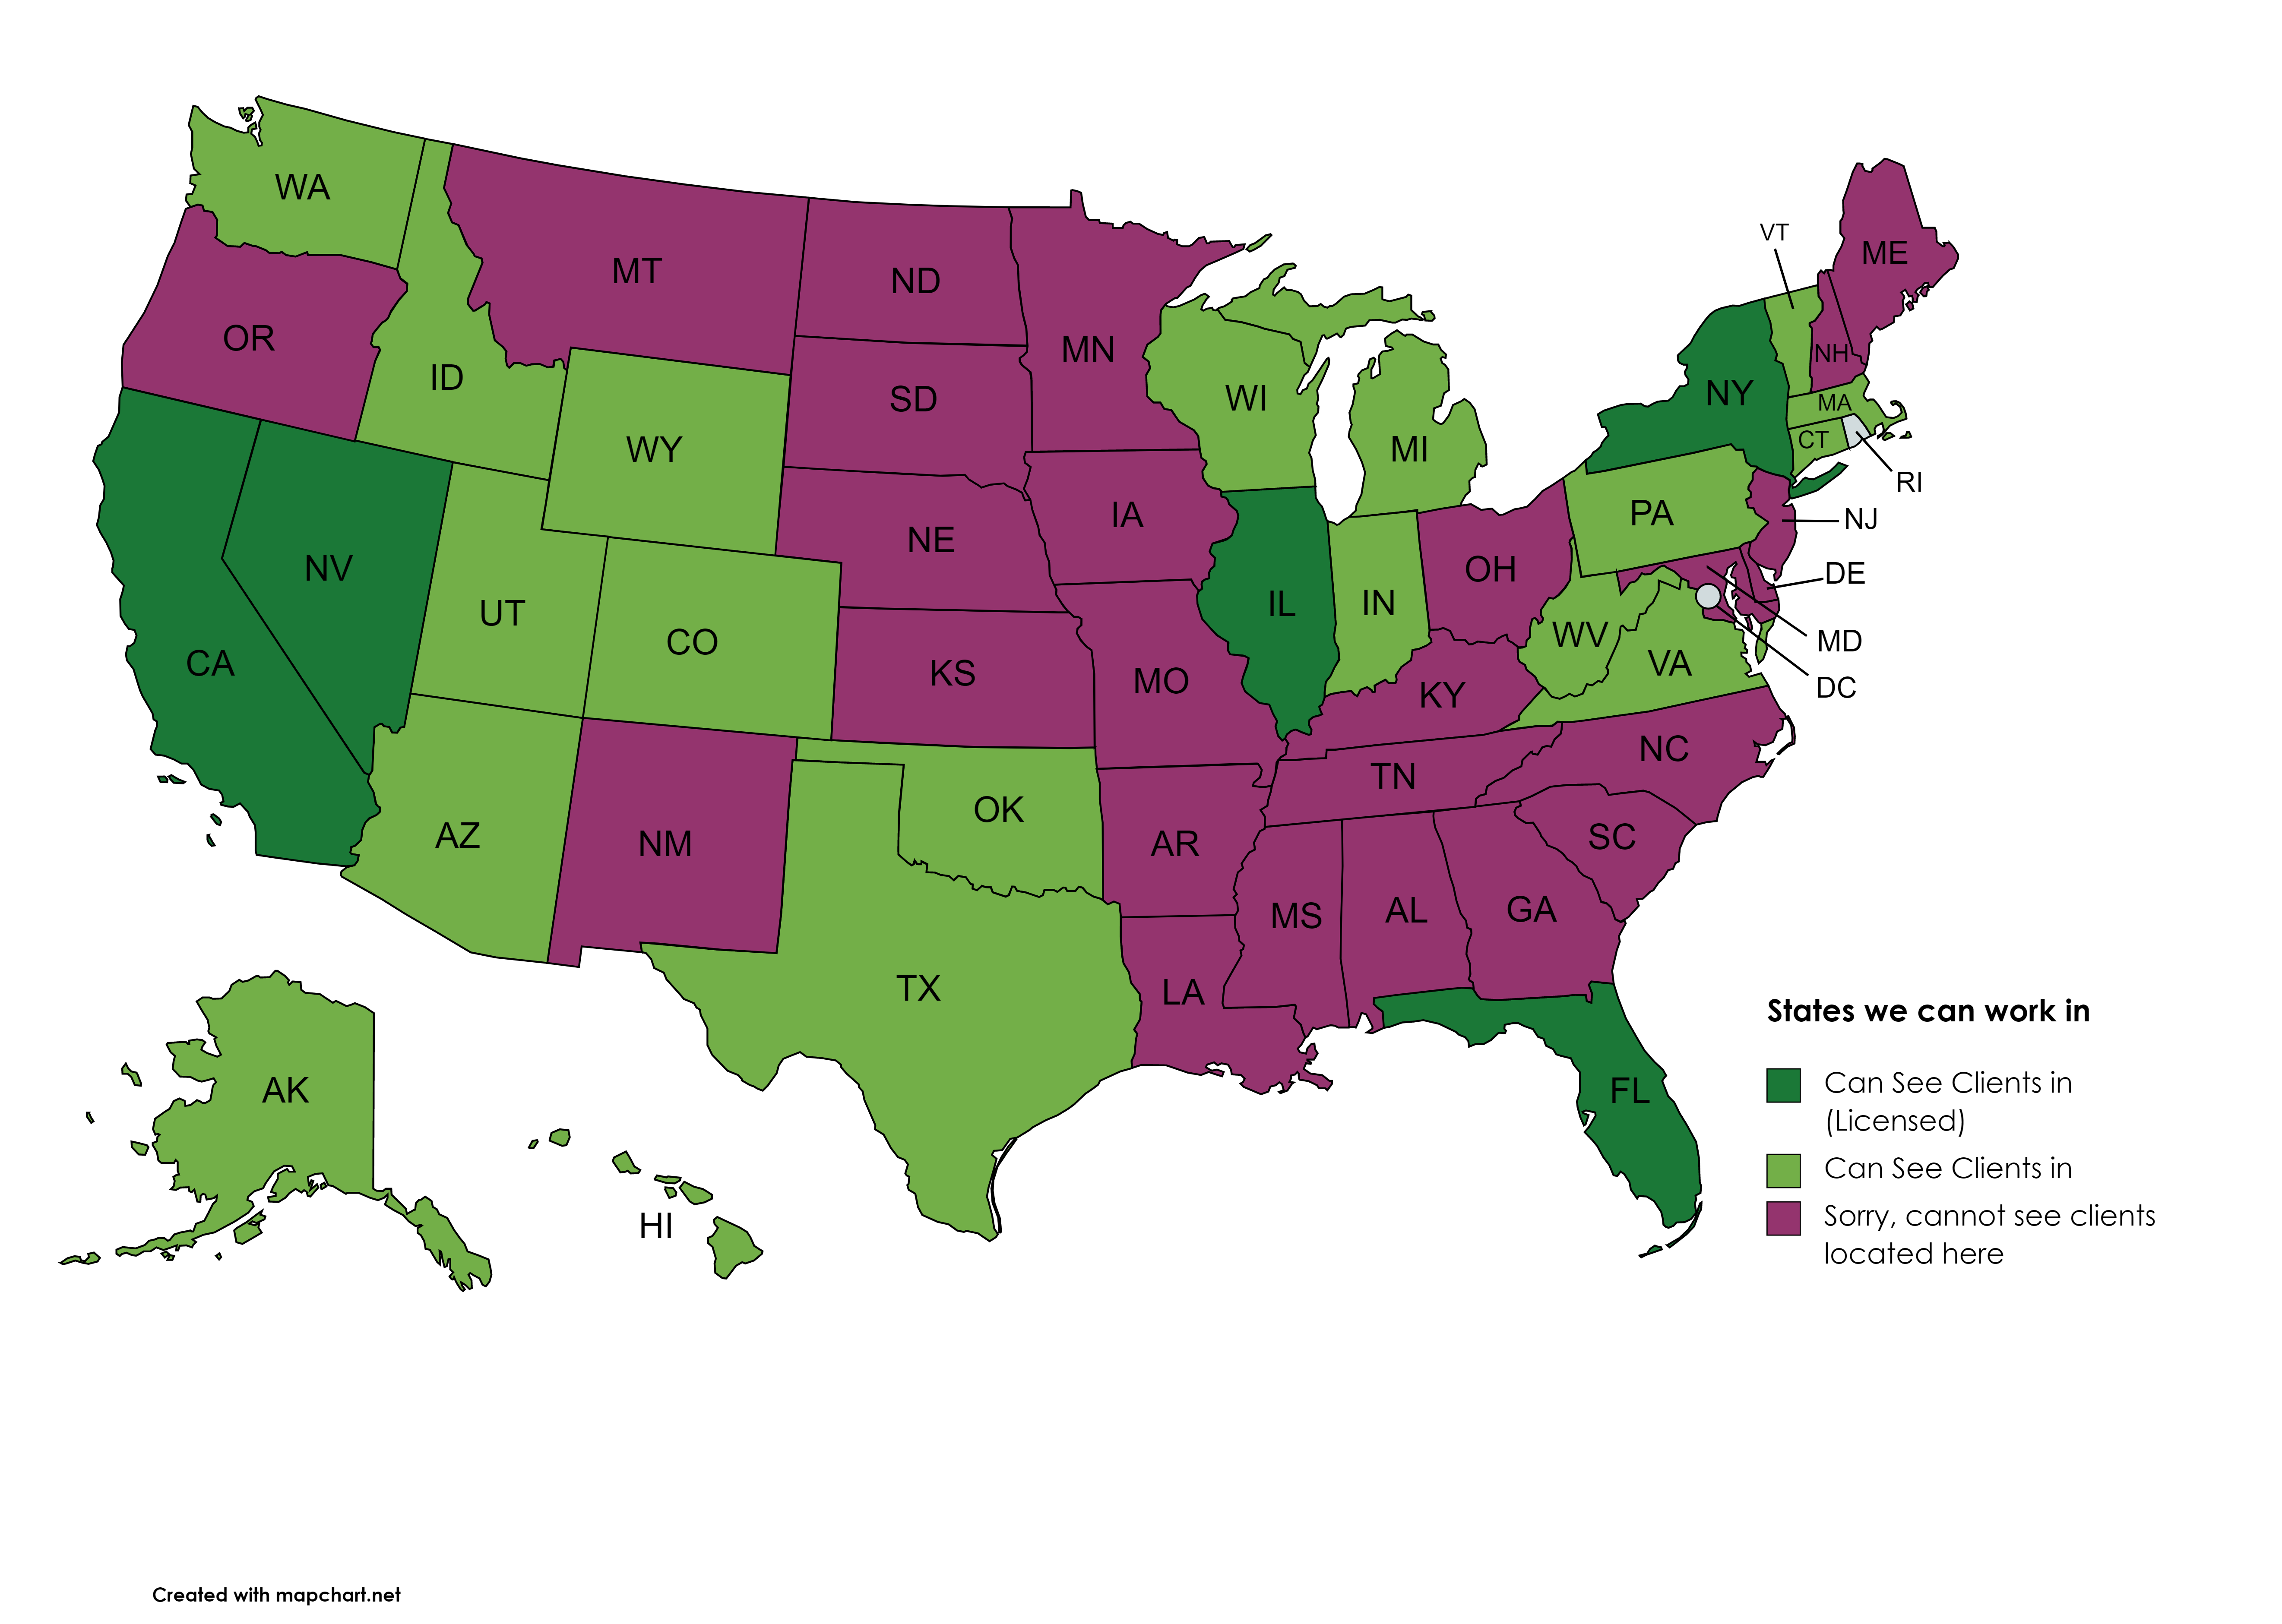 states we can see clients in - NYAN